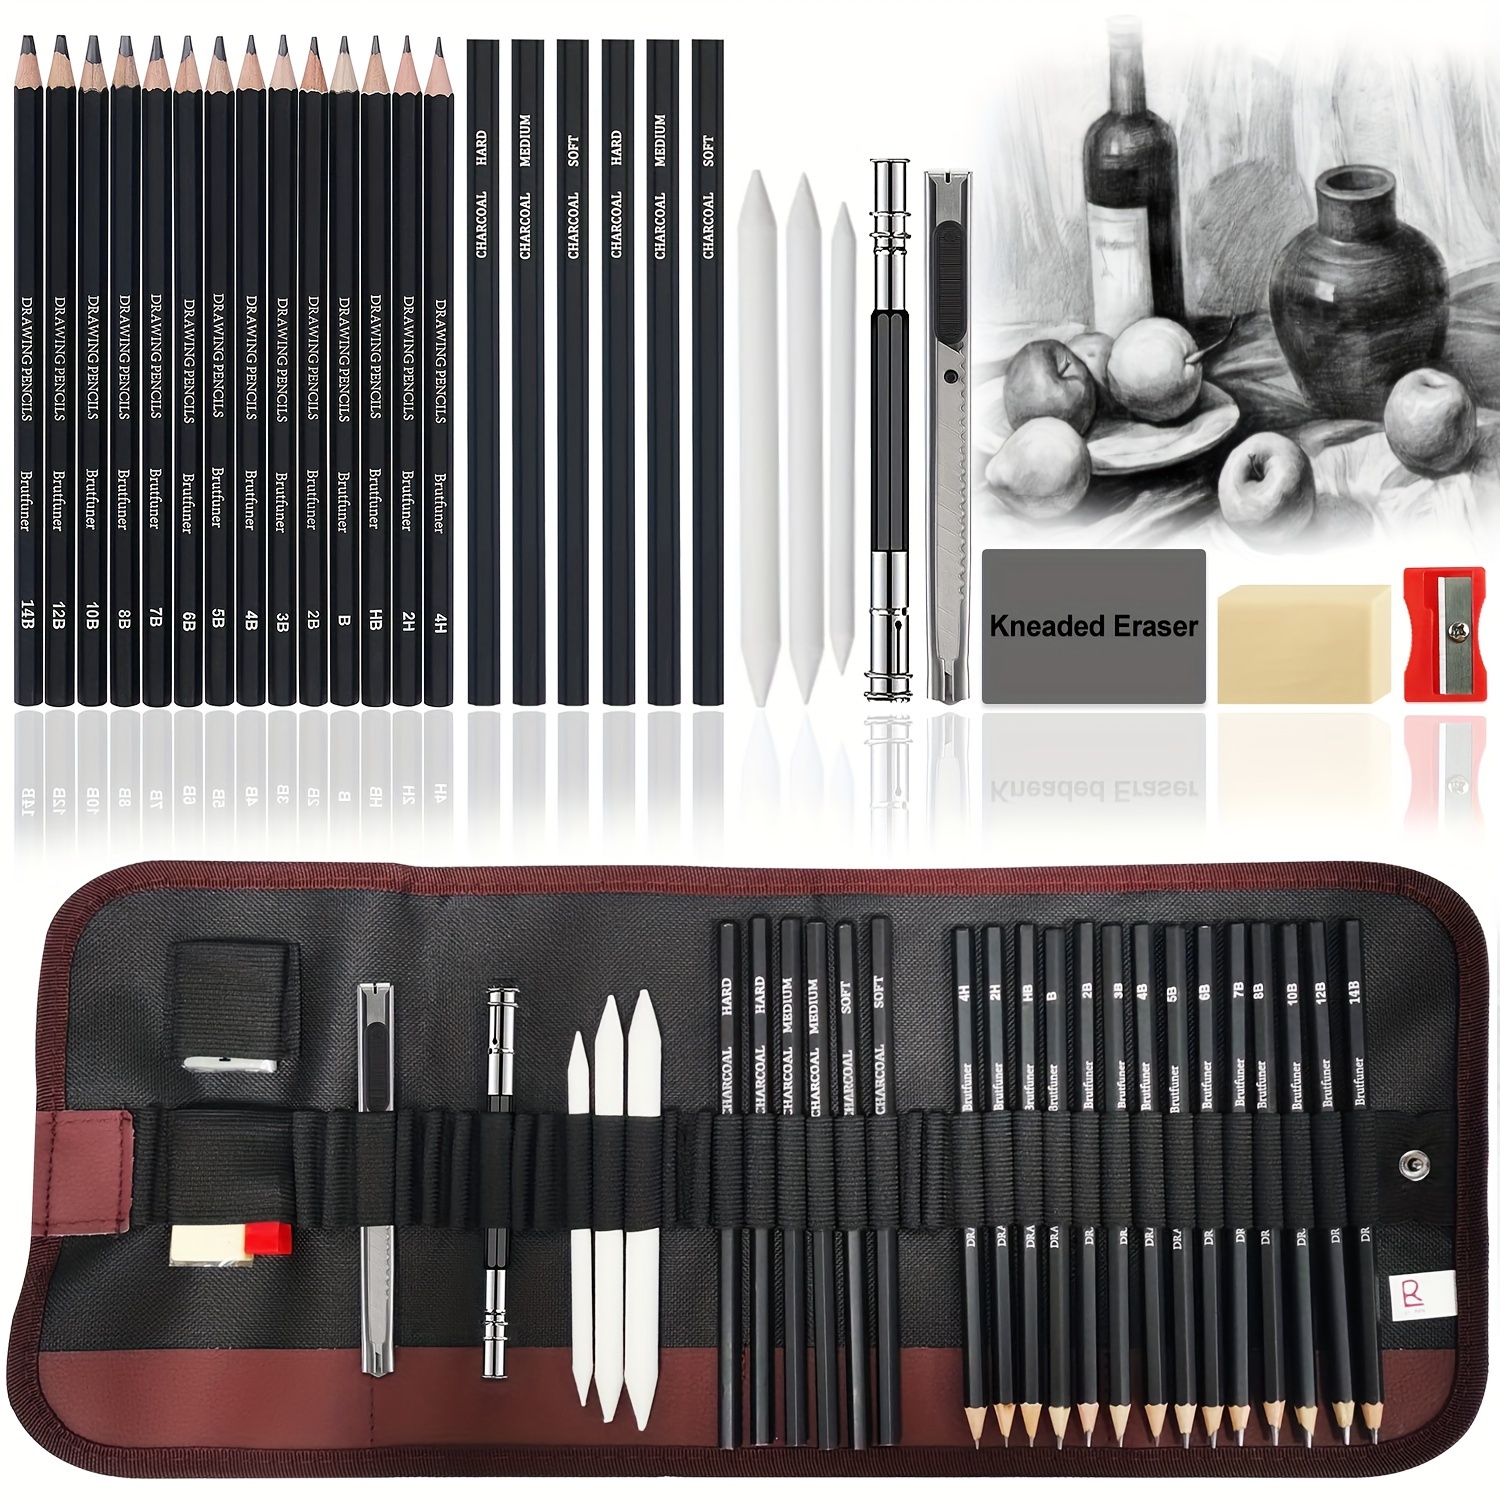 Drawing Kit, Shuttle Art 52 Pack Drawing Pencils Set, Professional Drawing  Art Kit with Sketch Pencils, Graphite Charcoal Sticks, Drawing Pad in